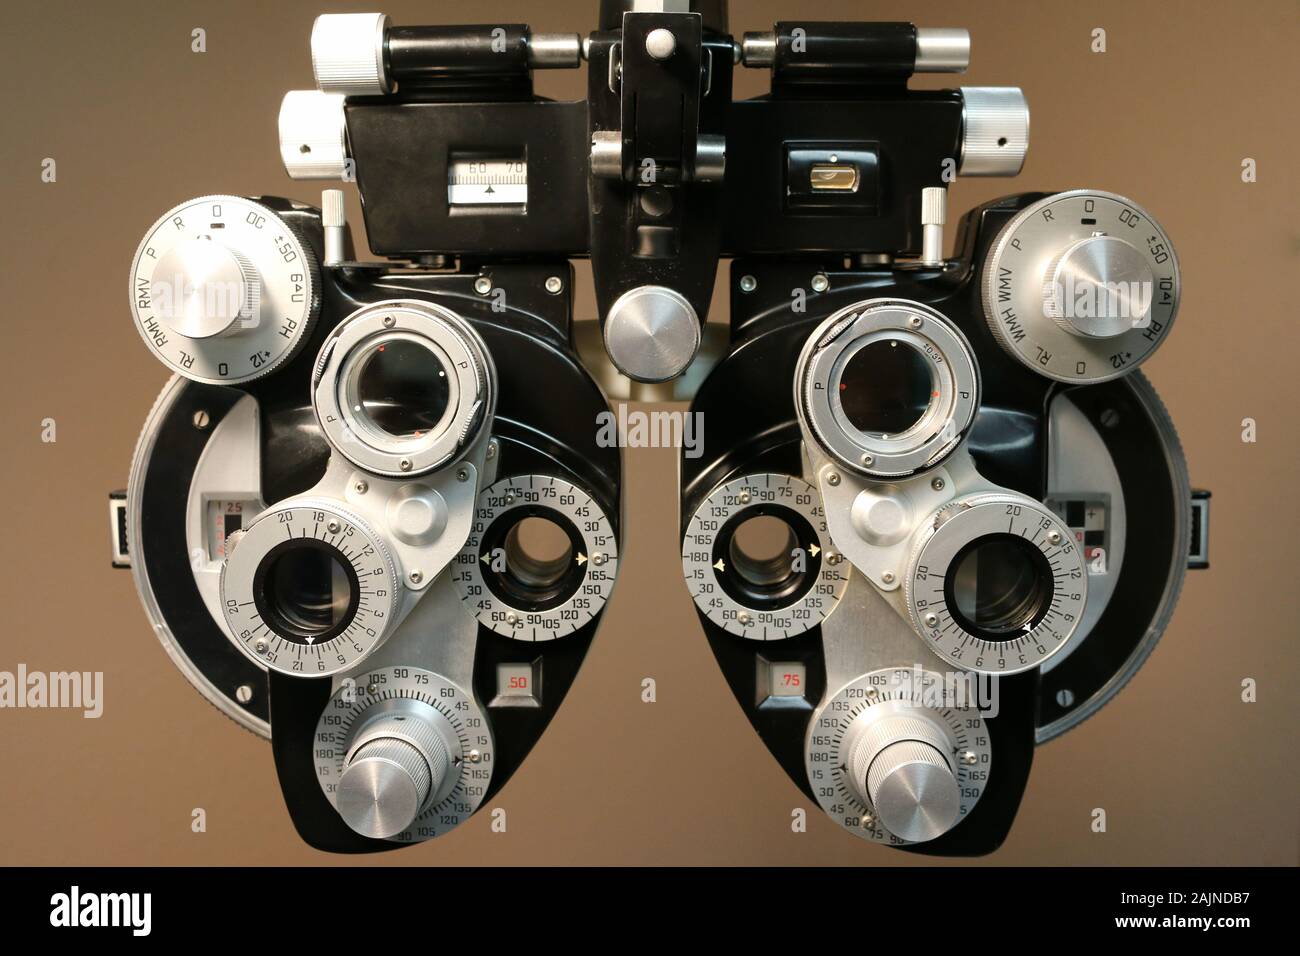 Close View of Phoropter Dials for Eye Exam Optometry Equipment Stock Photo